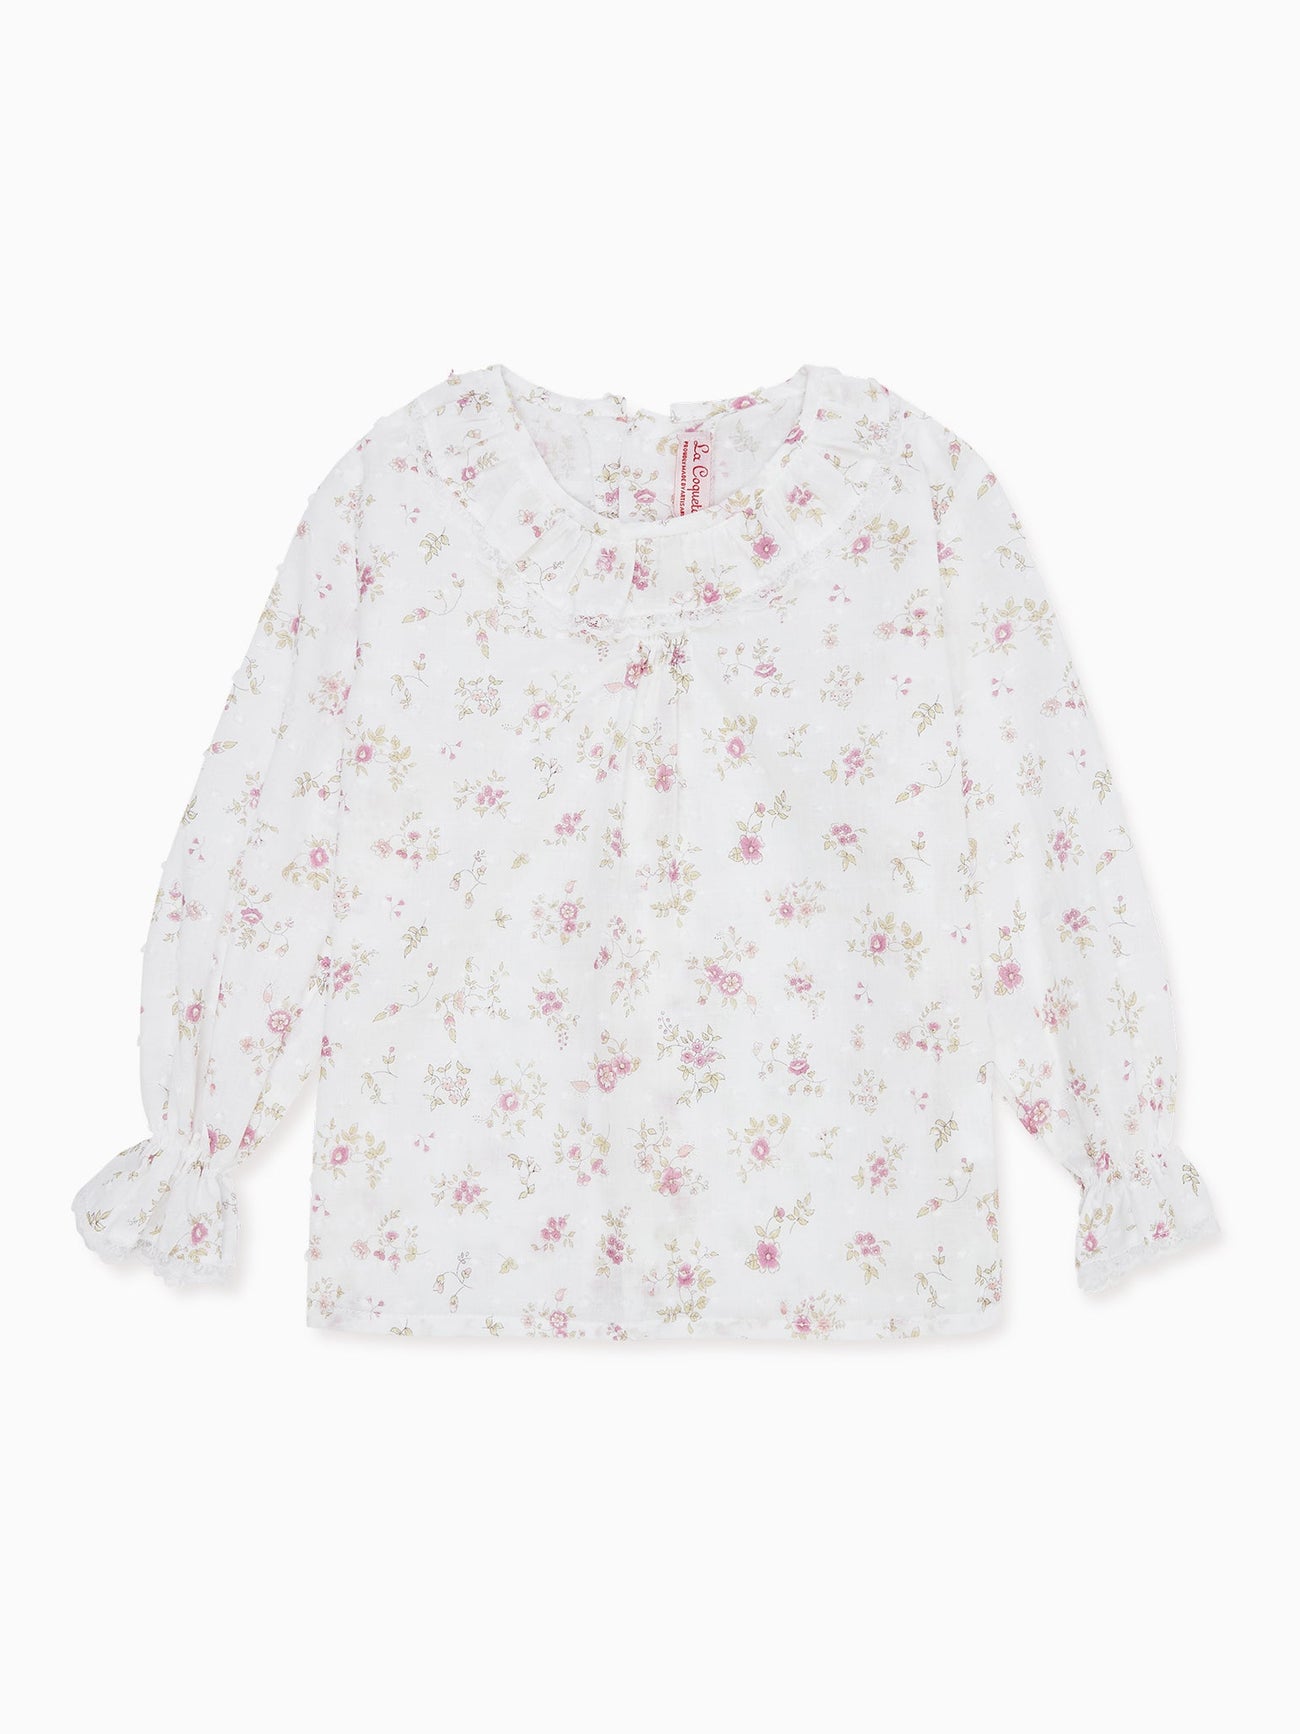 Ivory Floral Kate Cotton Baby Girl Shirt